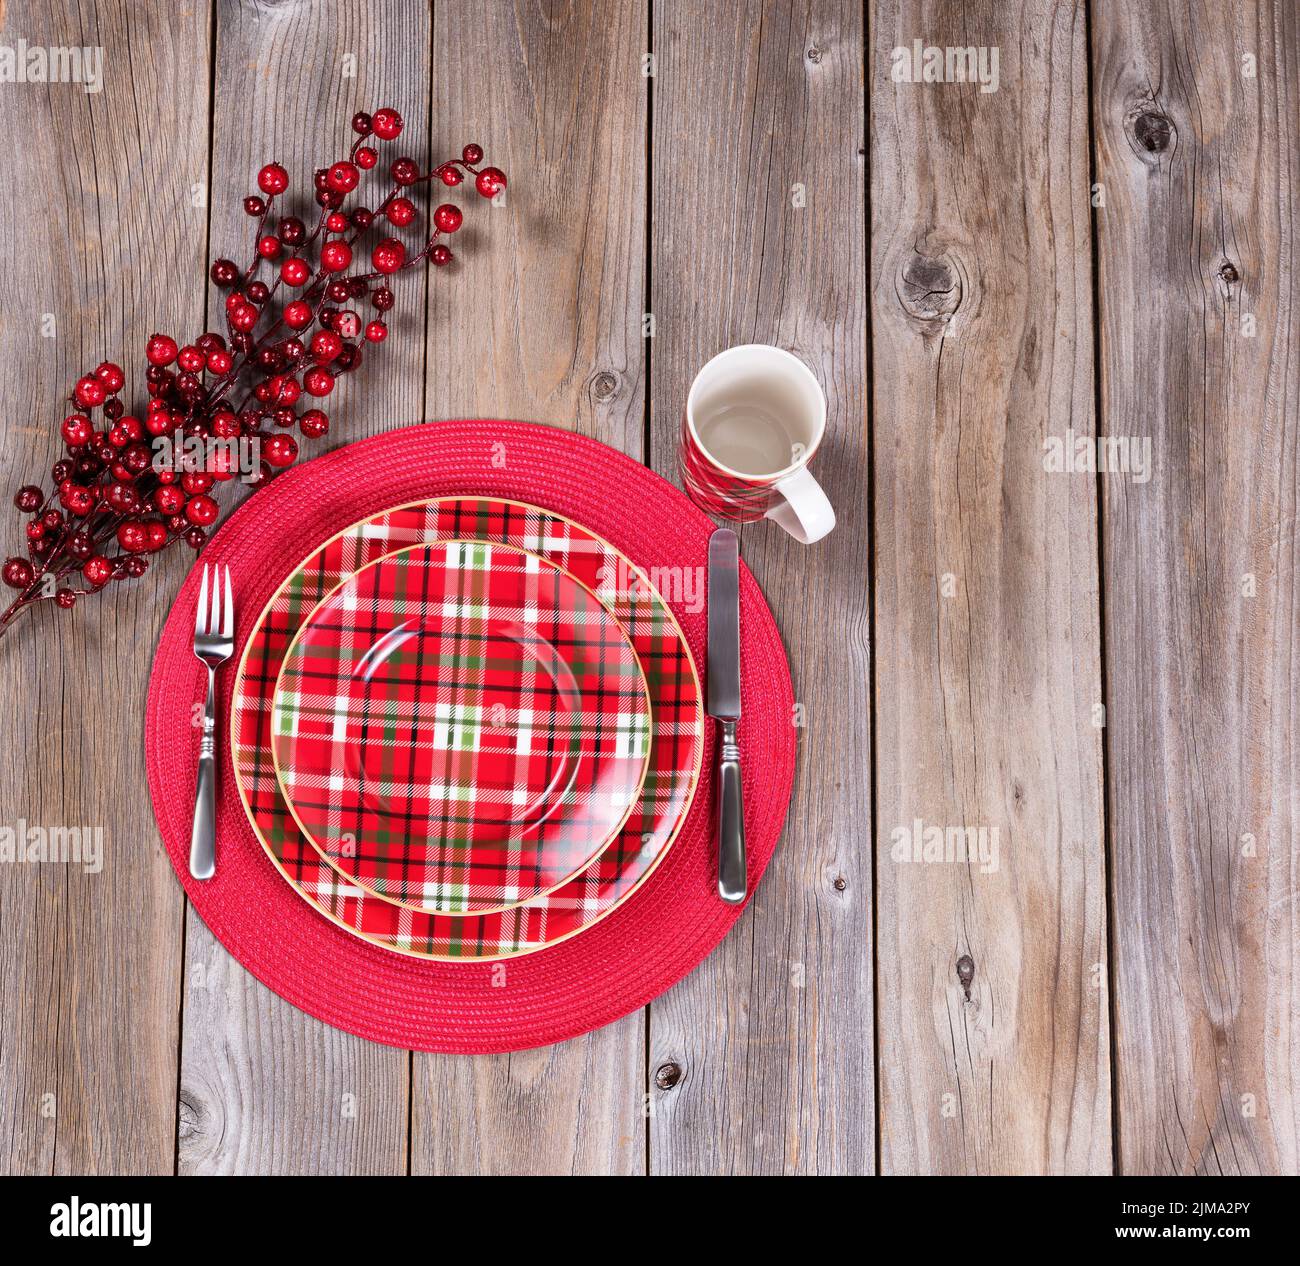 Xmas dinner setting for the festive holiday season on rustic wood Stock Photo